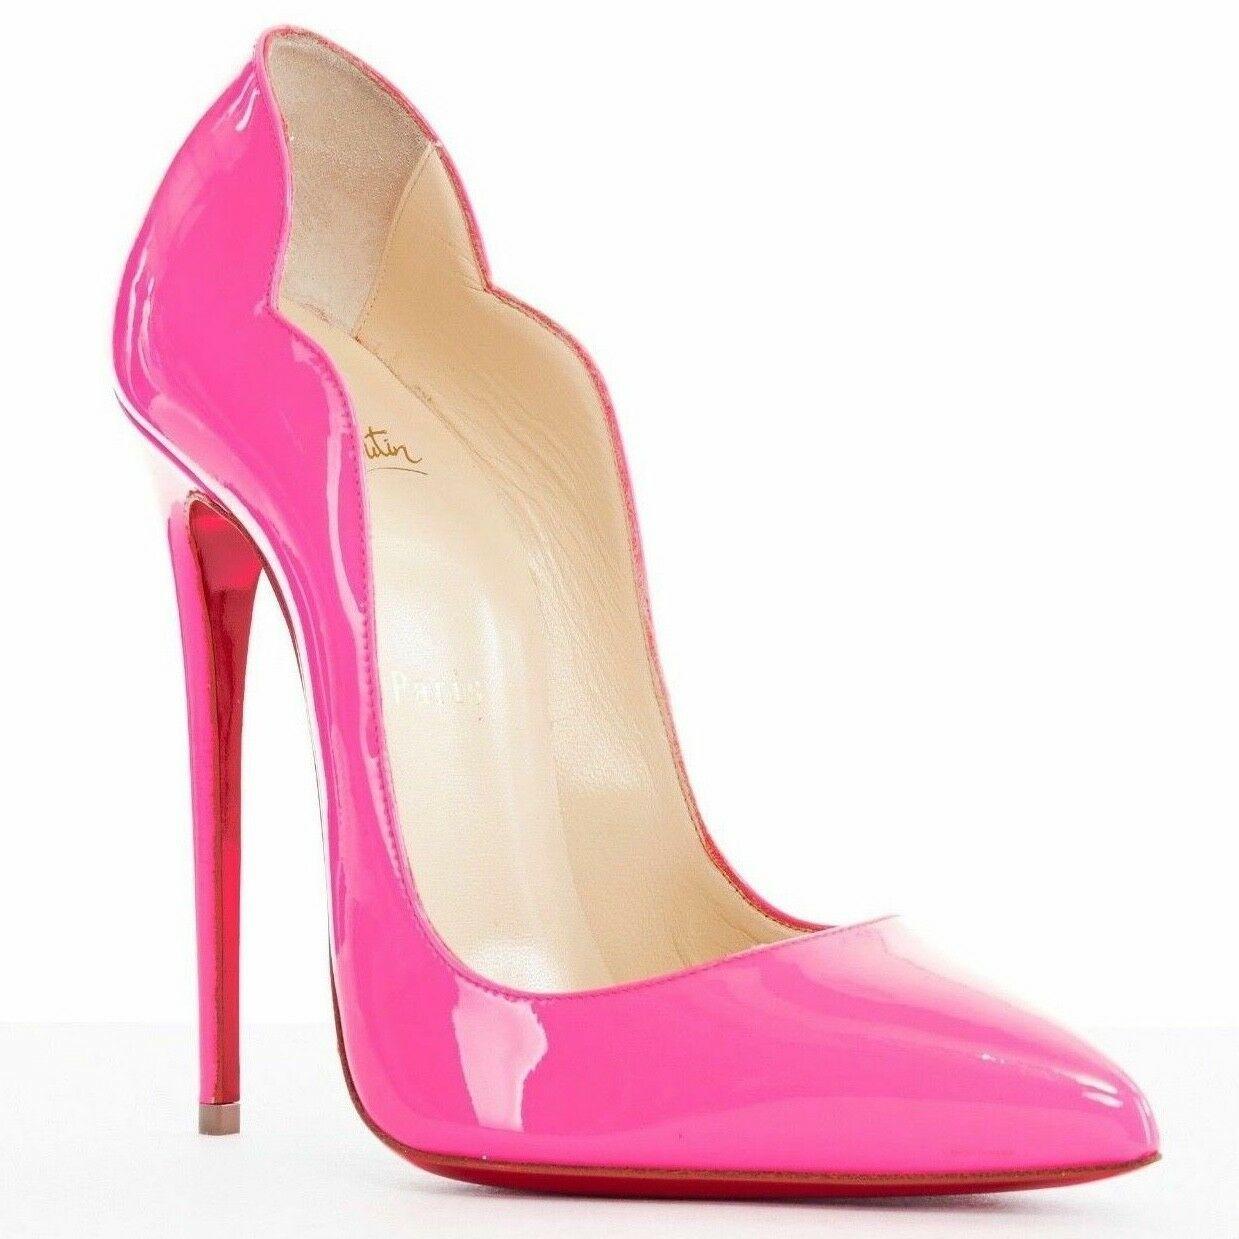 new CHRISTIAN LOUBOUTIN Hot Chick 130 neon pink patent pigalle pumps heel EU37
CHRISTIAN LOUBOUTIN
Hot Chick 130. Neon fluorescent pink. 
Shiney patent leather. Curved edges cut. Pointed toe. Stiletto heels. 
Signatured lacquered red leather sole.